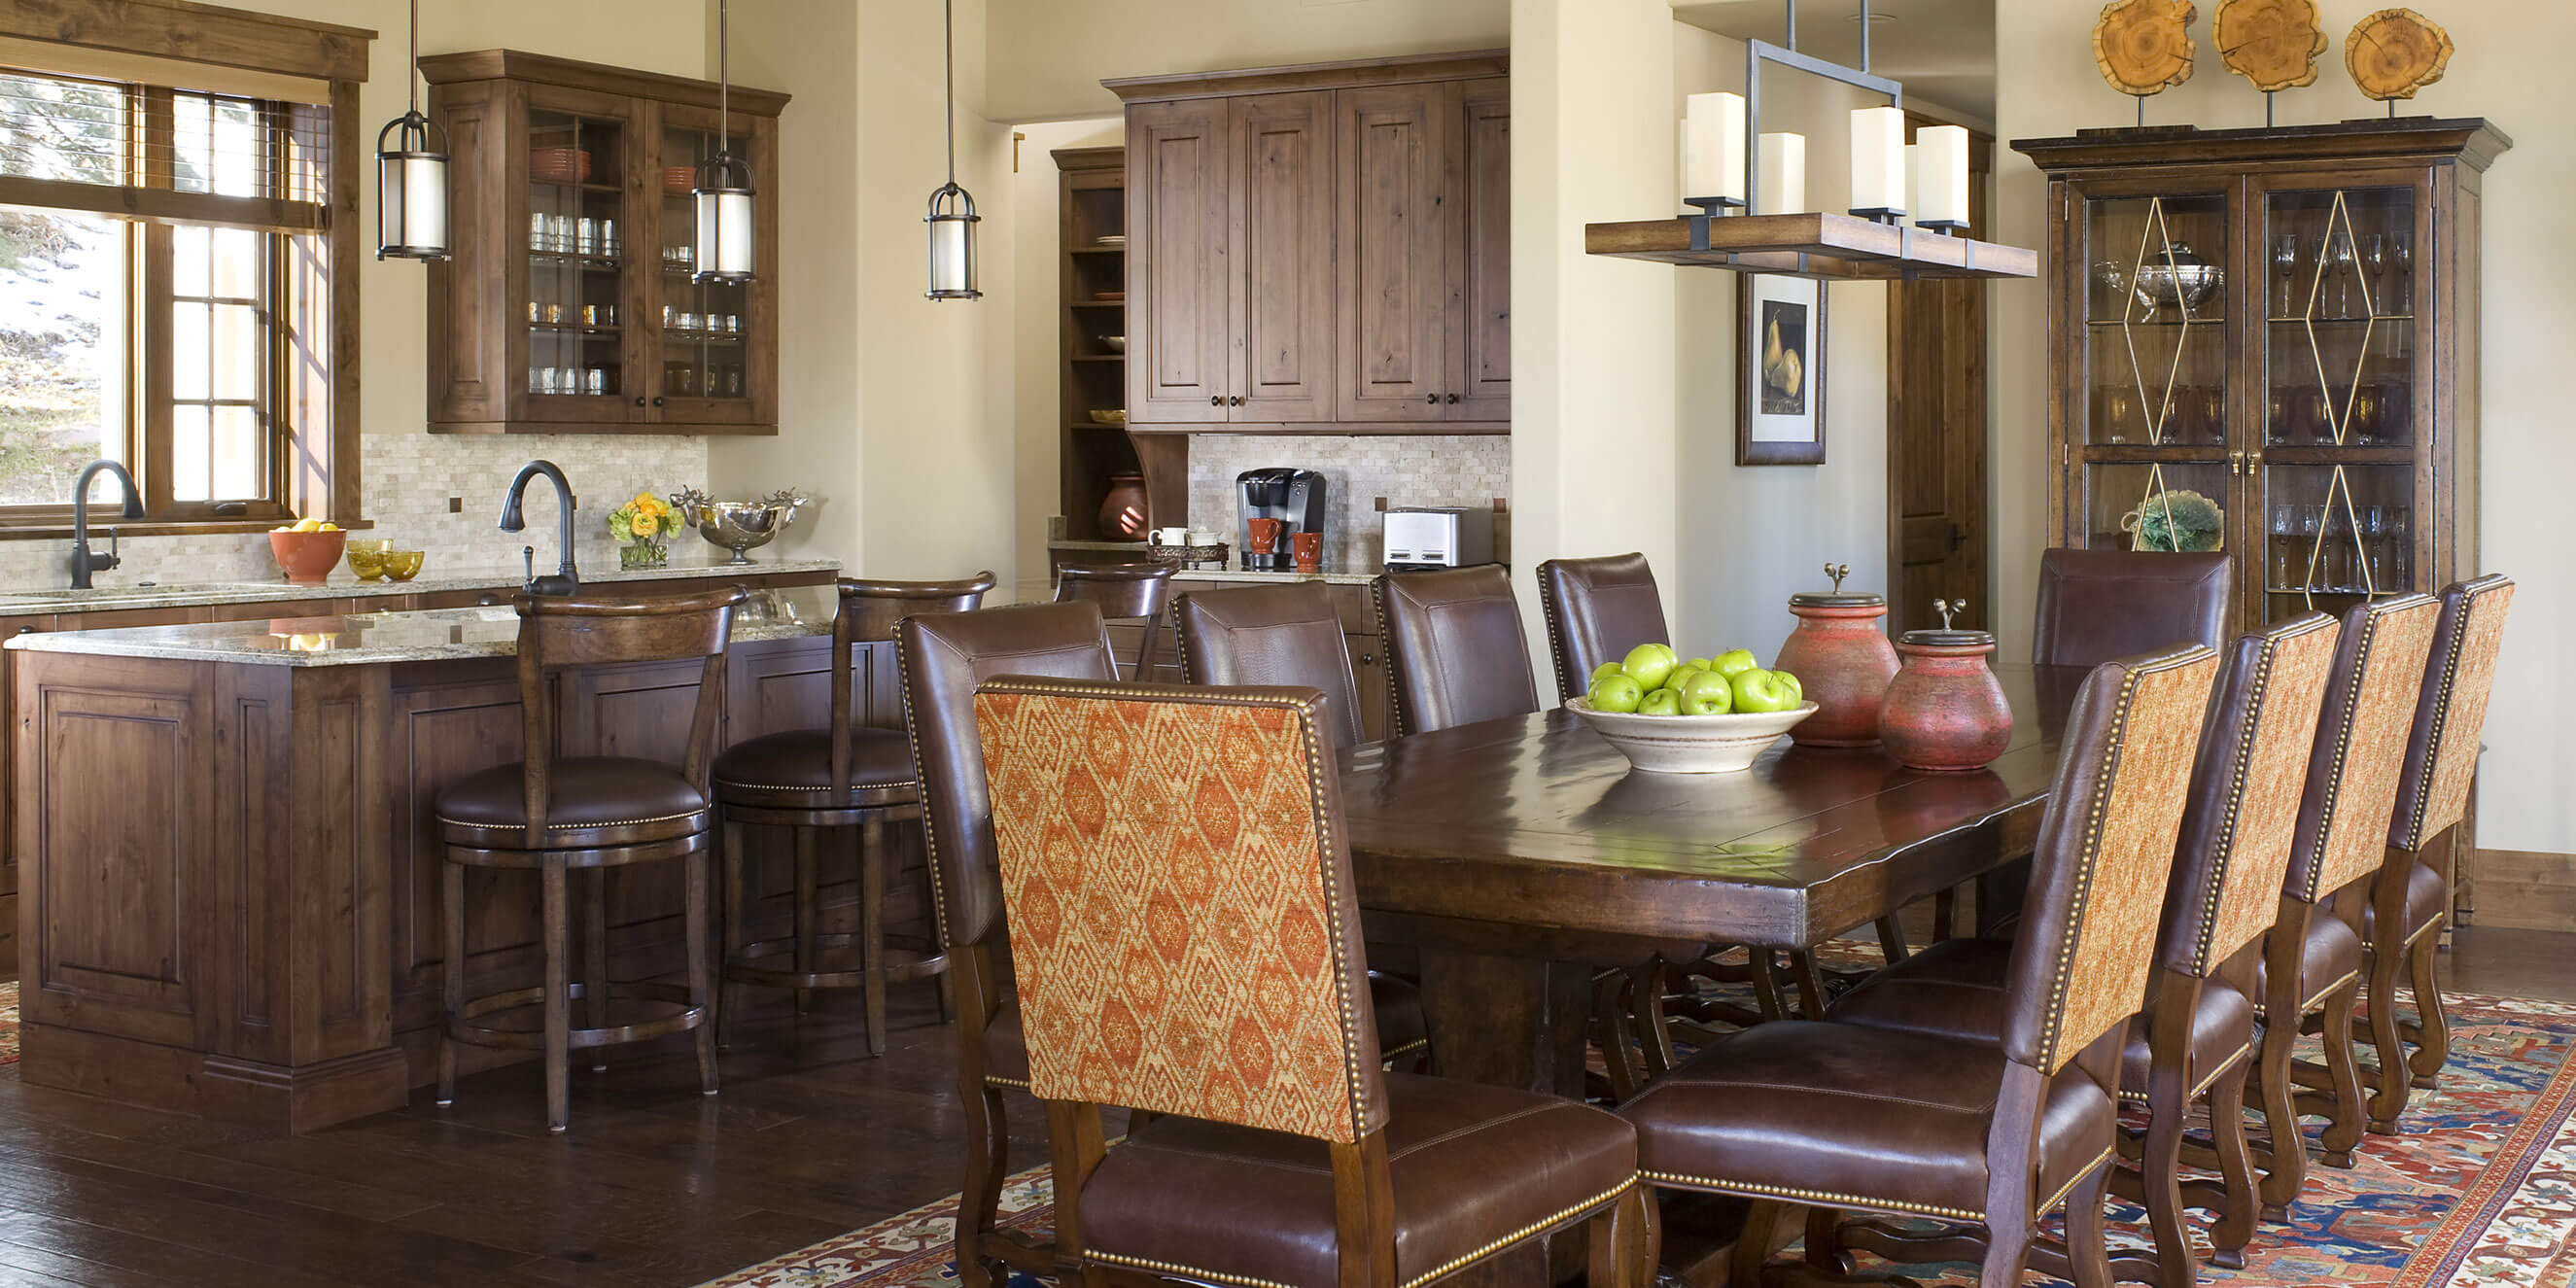 Dining Room and Kitchen of Custom Home in Beaver Creek, Colorado